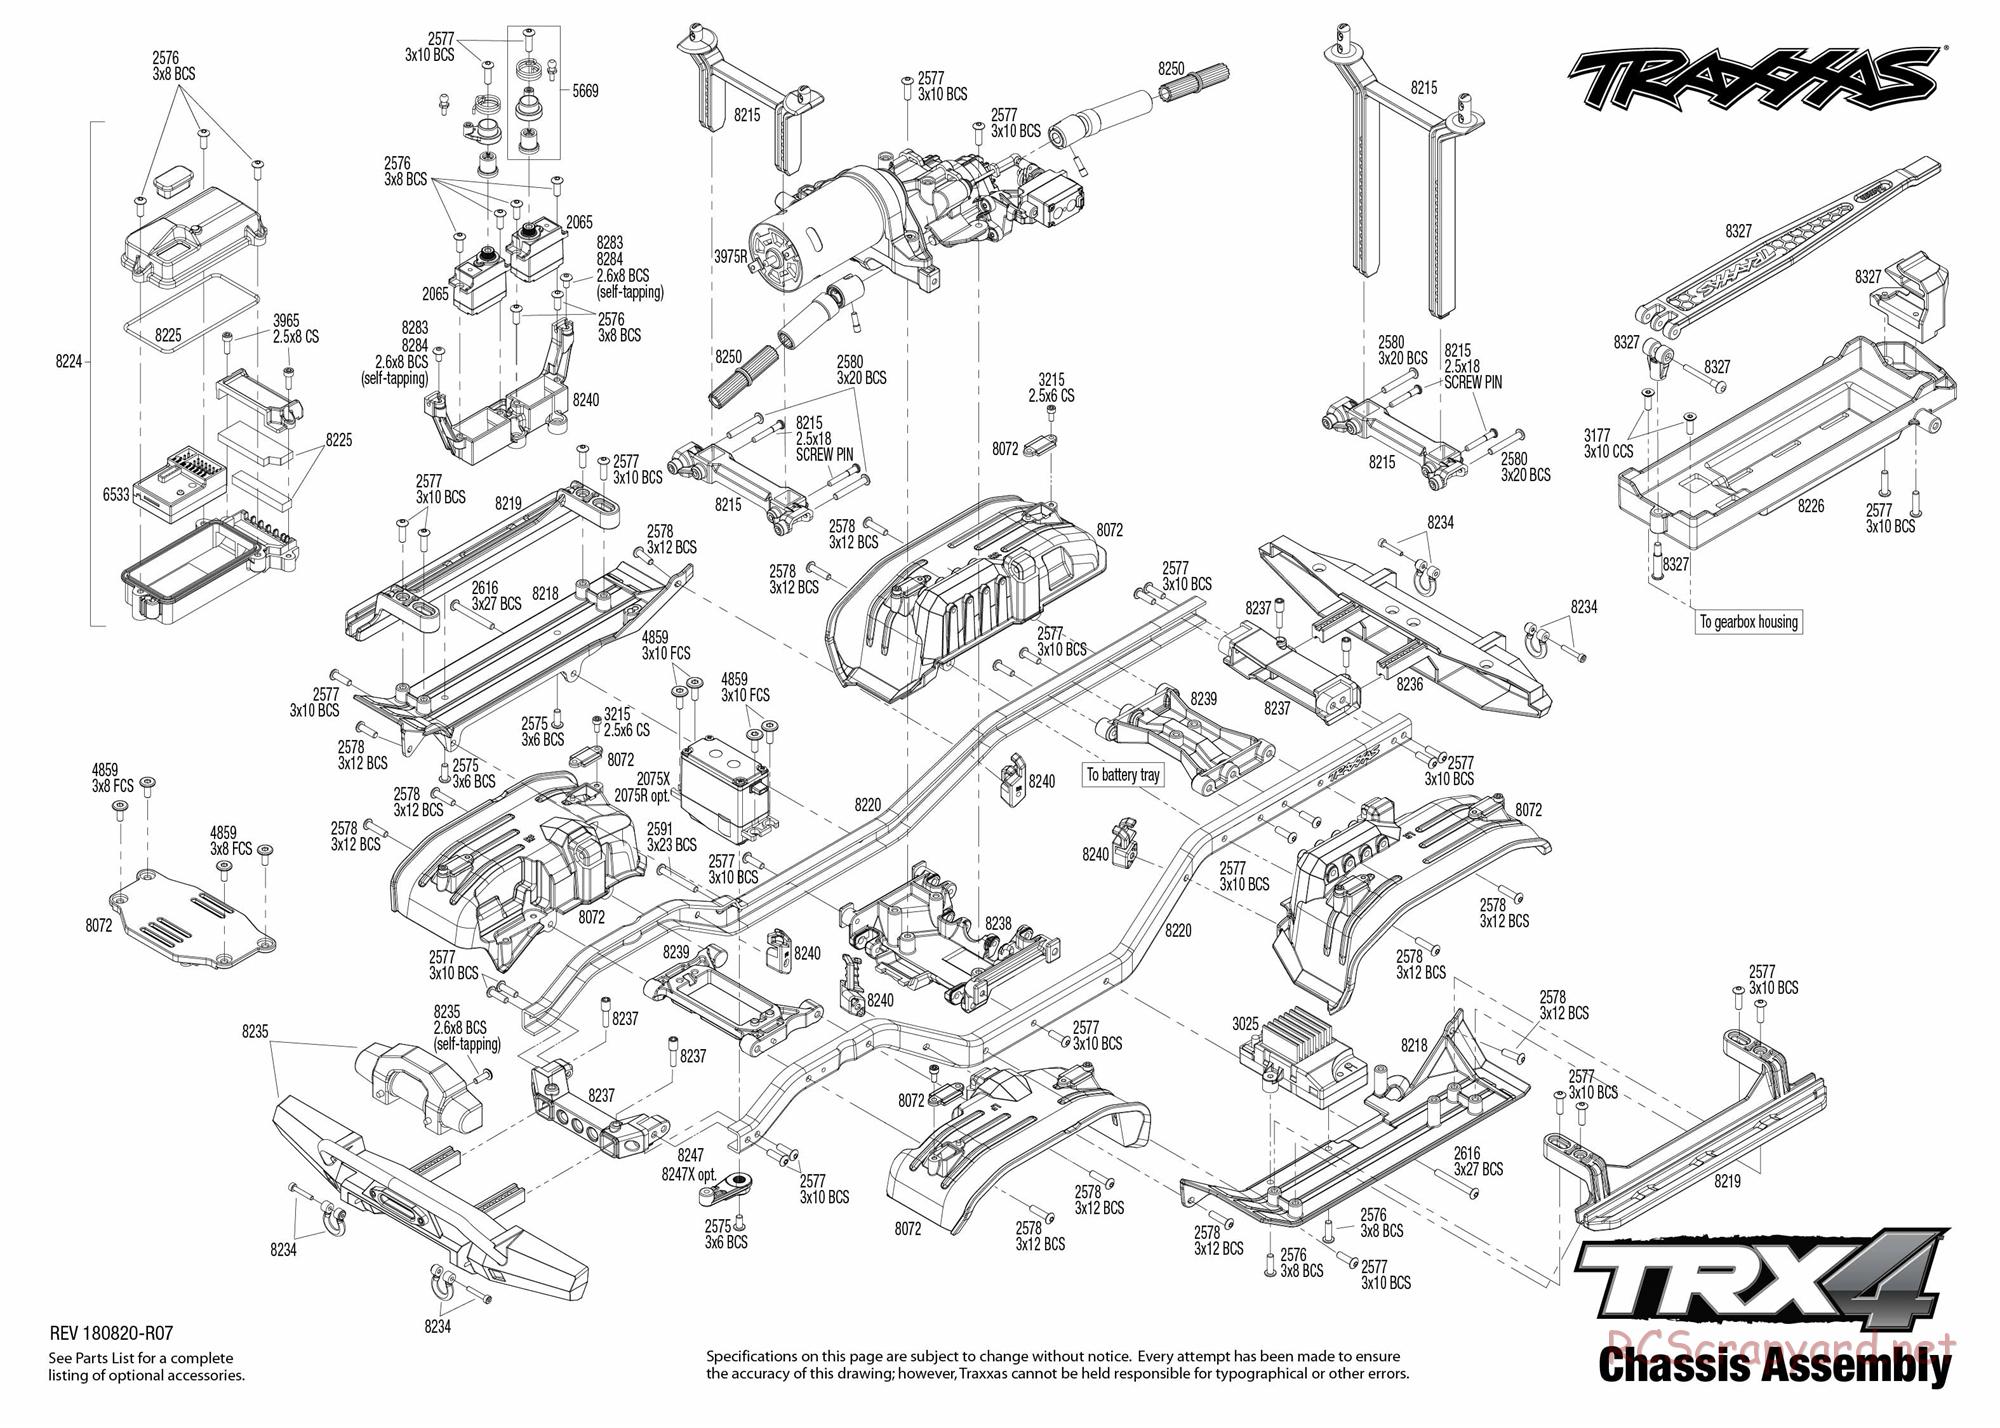 Traxxas - TRX-4 Chassis (2018) - Exploded Views - Page 1